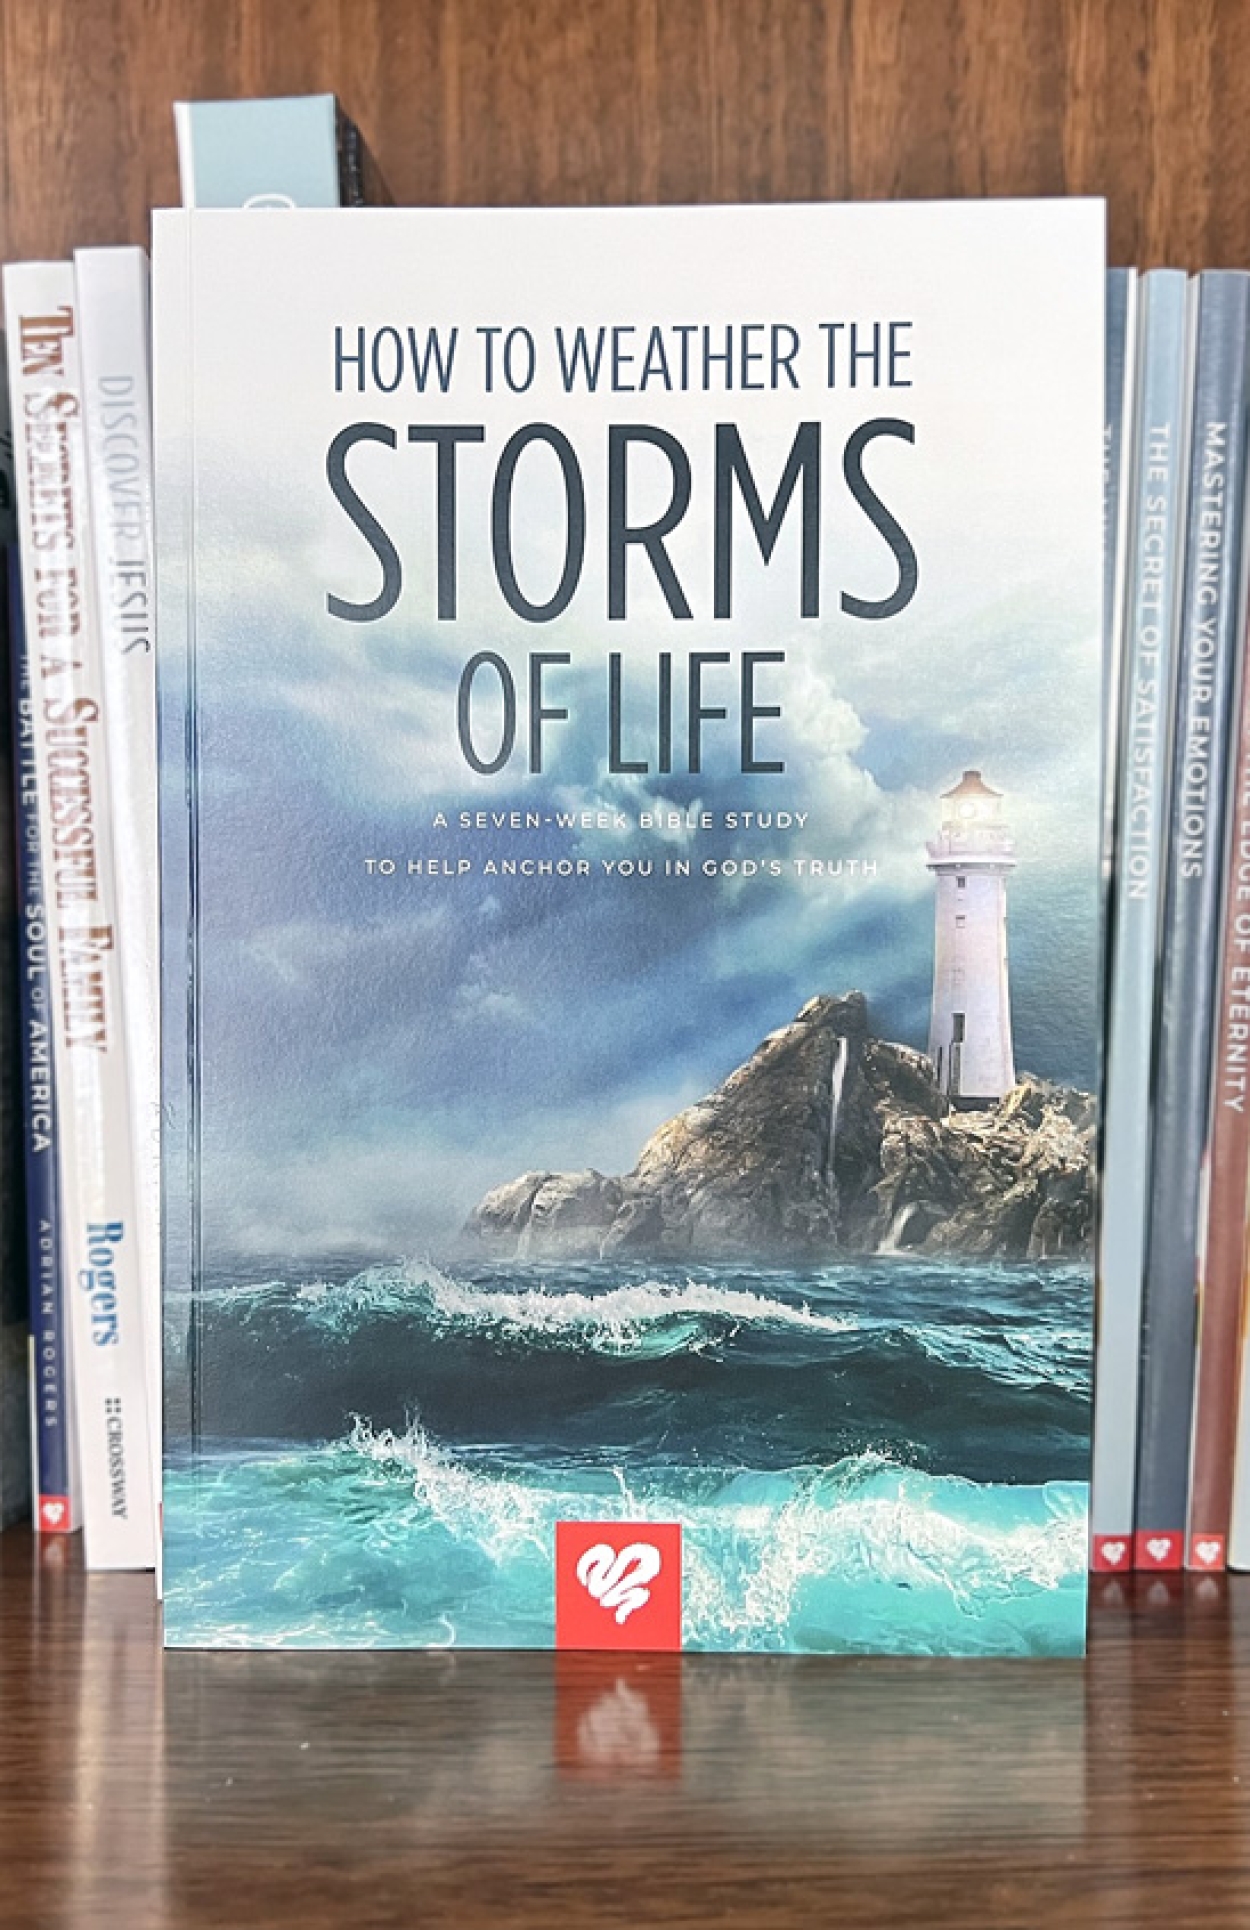 How to weather the storms of life bible study bss165 BOOKSHELF